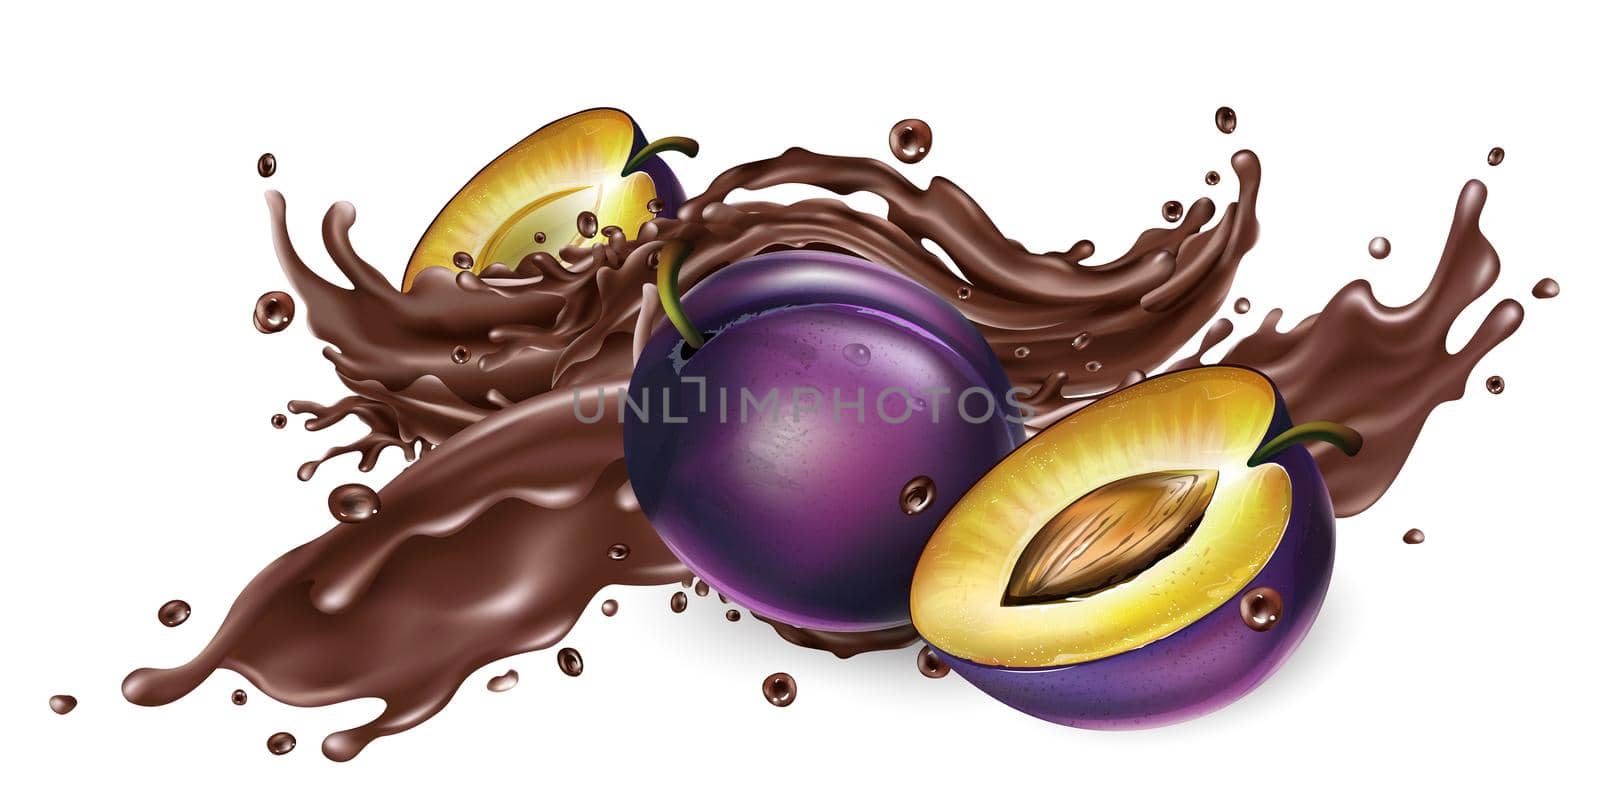 Splash of liquid chocolate and fresh plums. by ConceptCafe